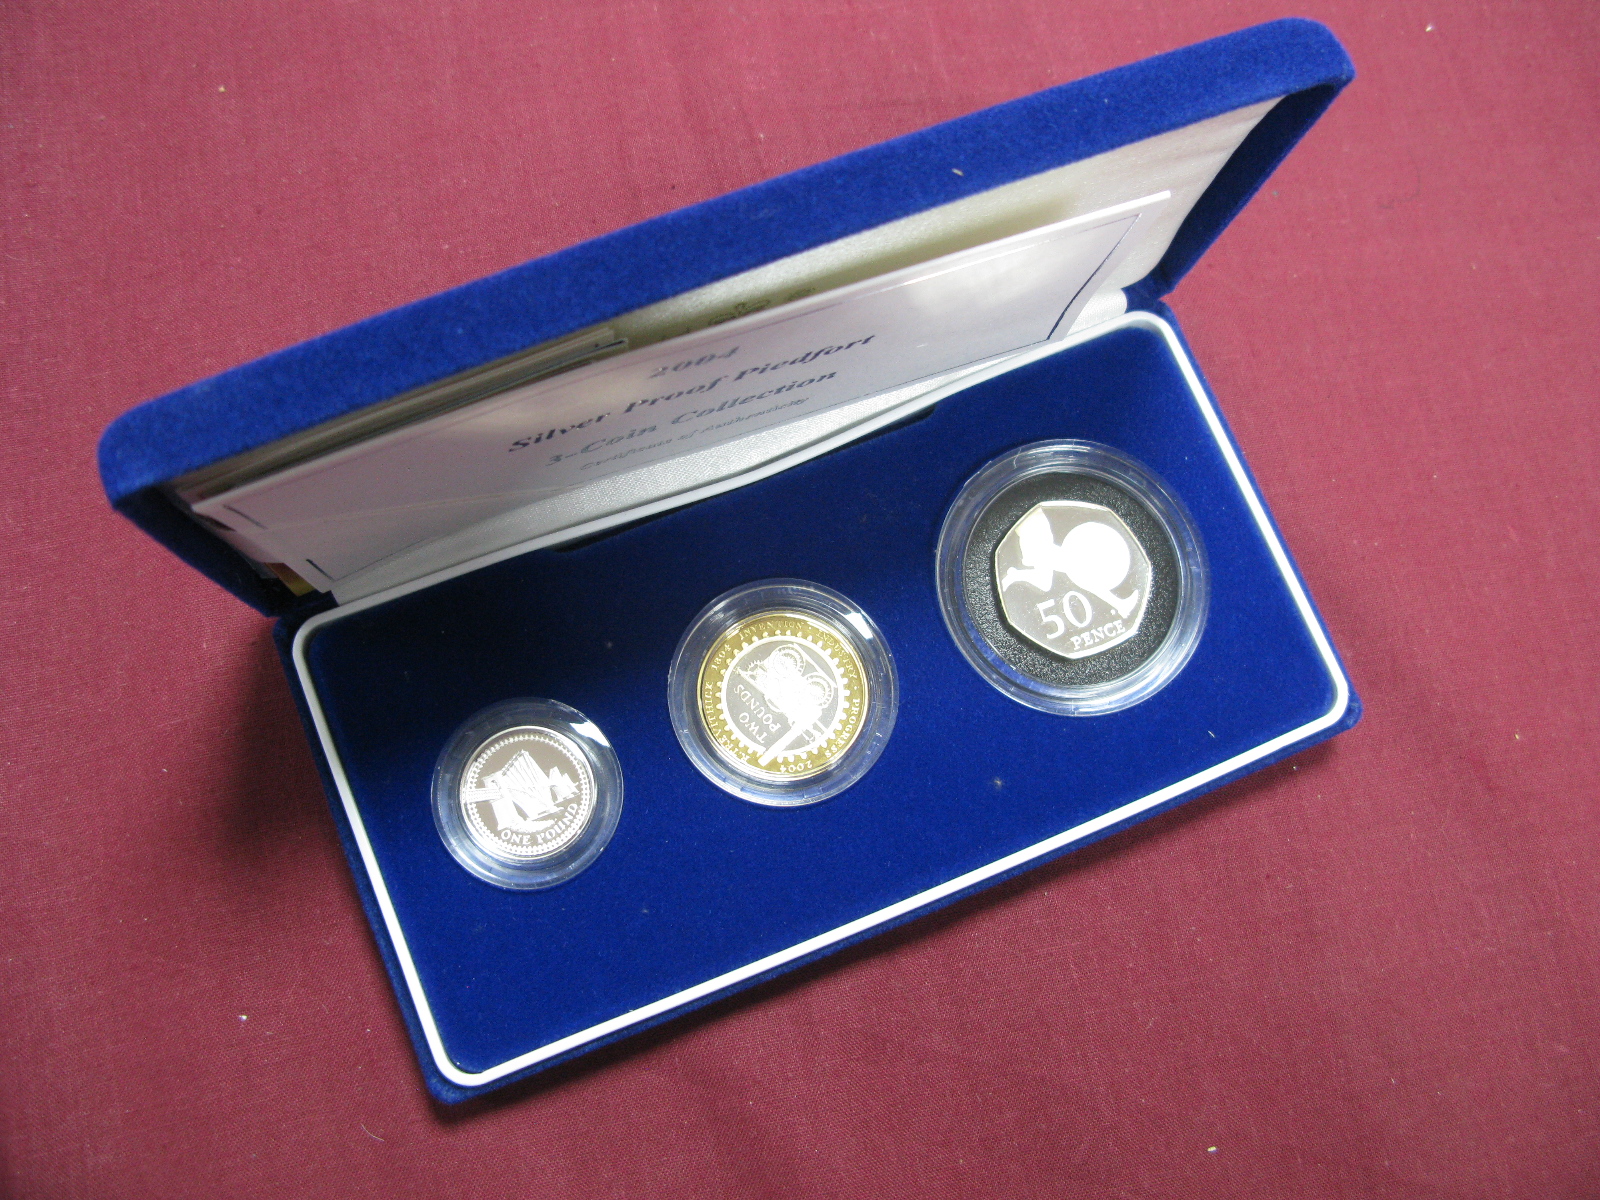 The Royal Mint 2004 Silver Proof Piedfort Three Coin Collection, comprising of Silver Piedfort One